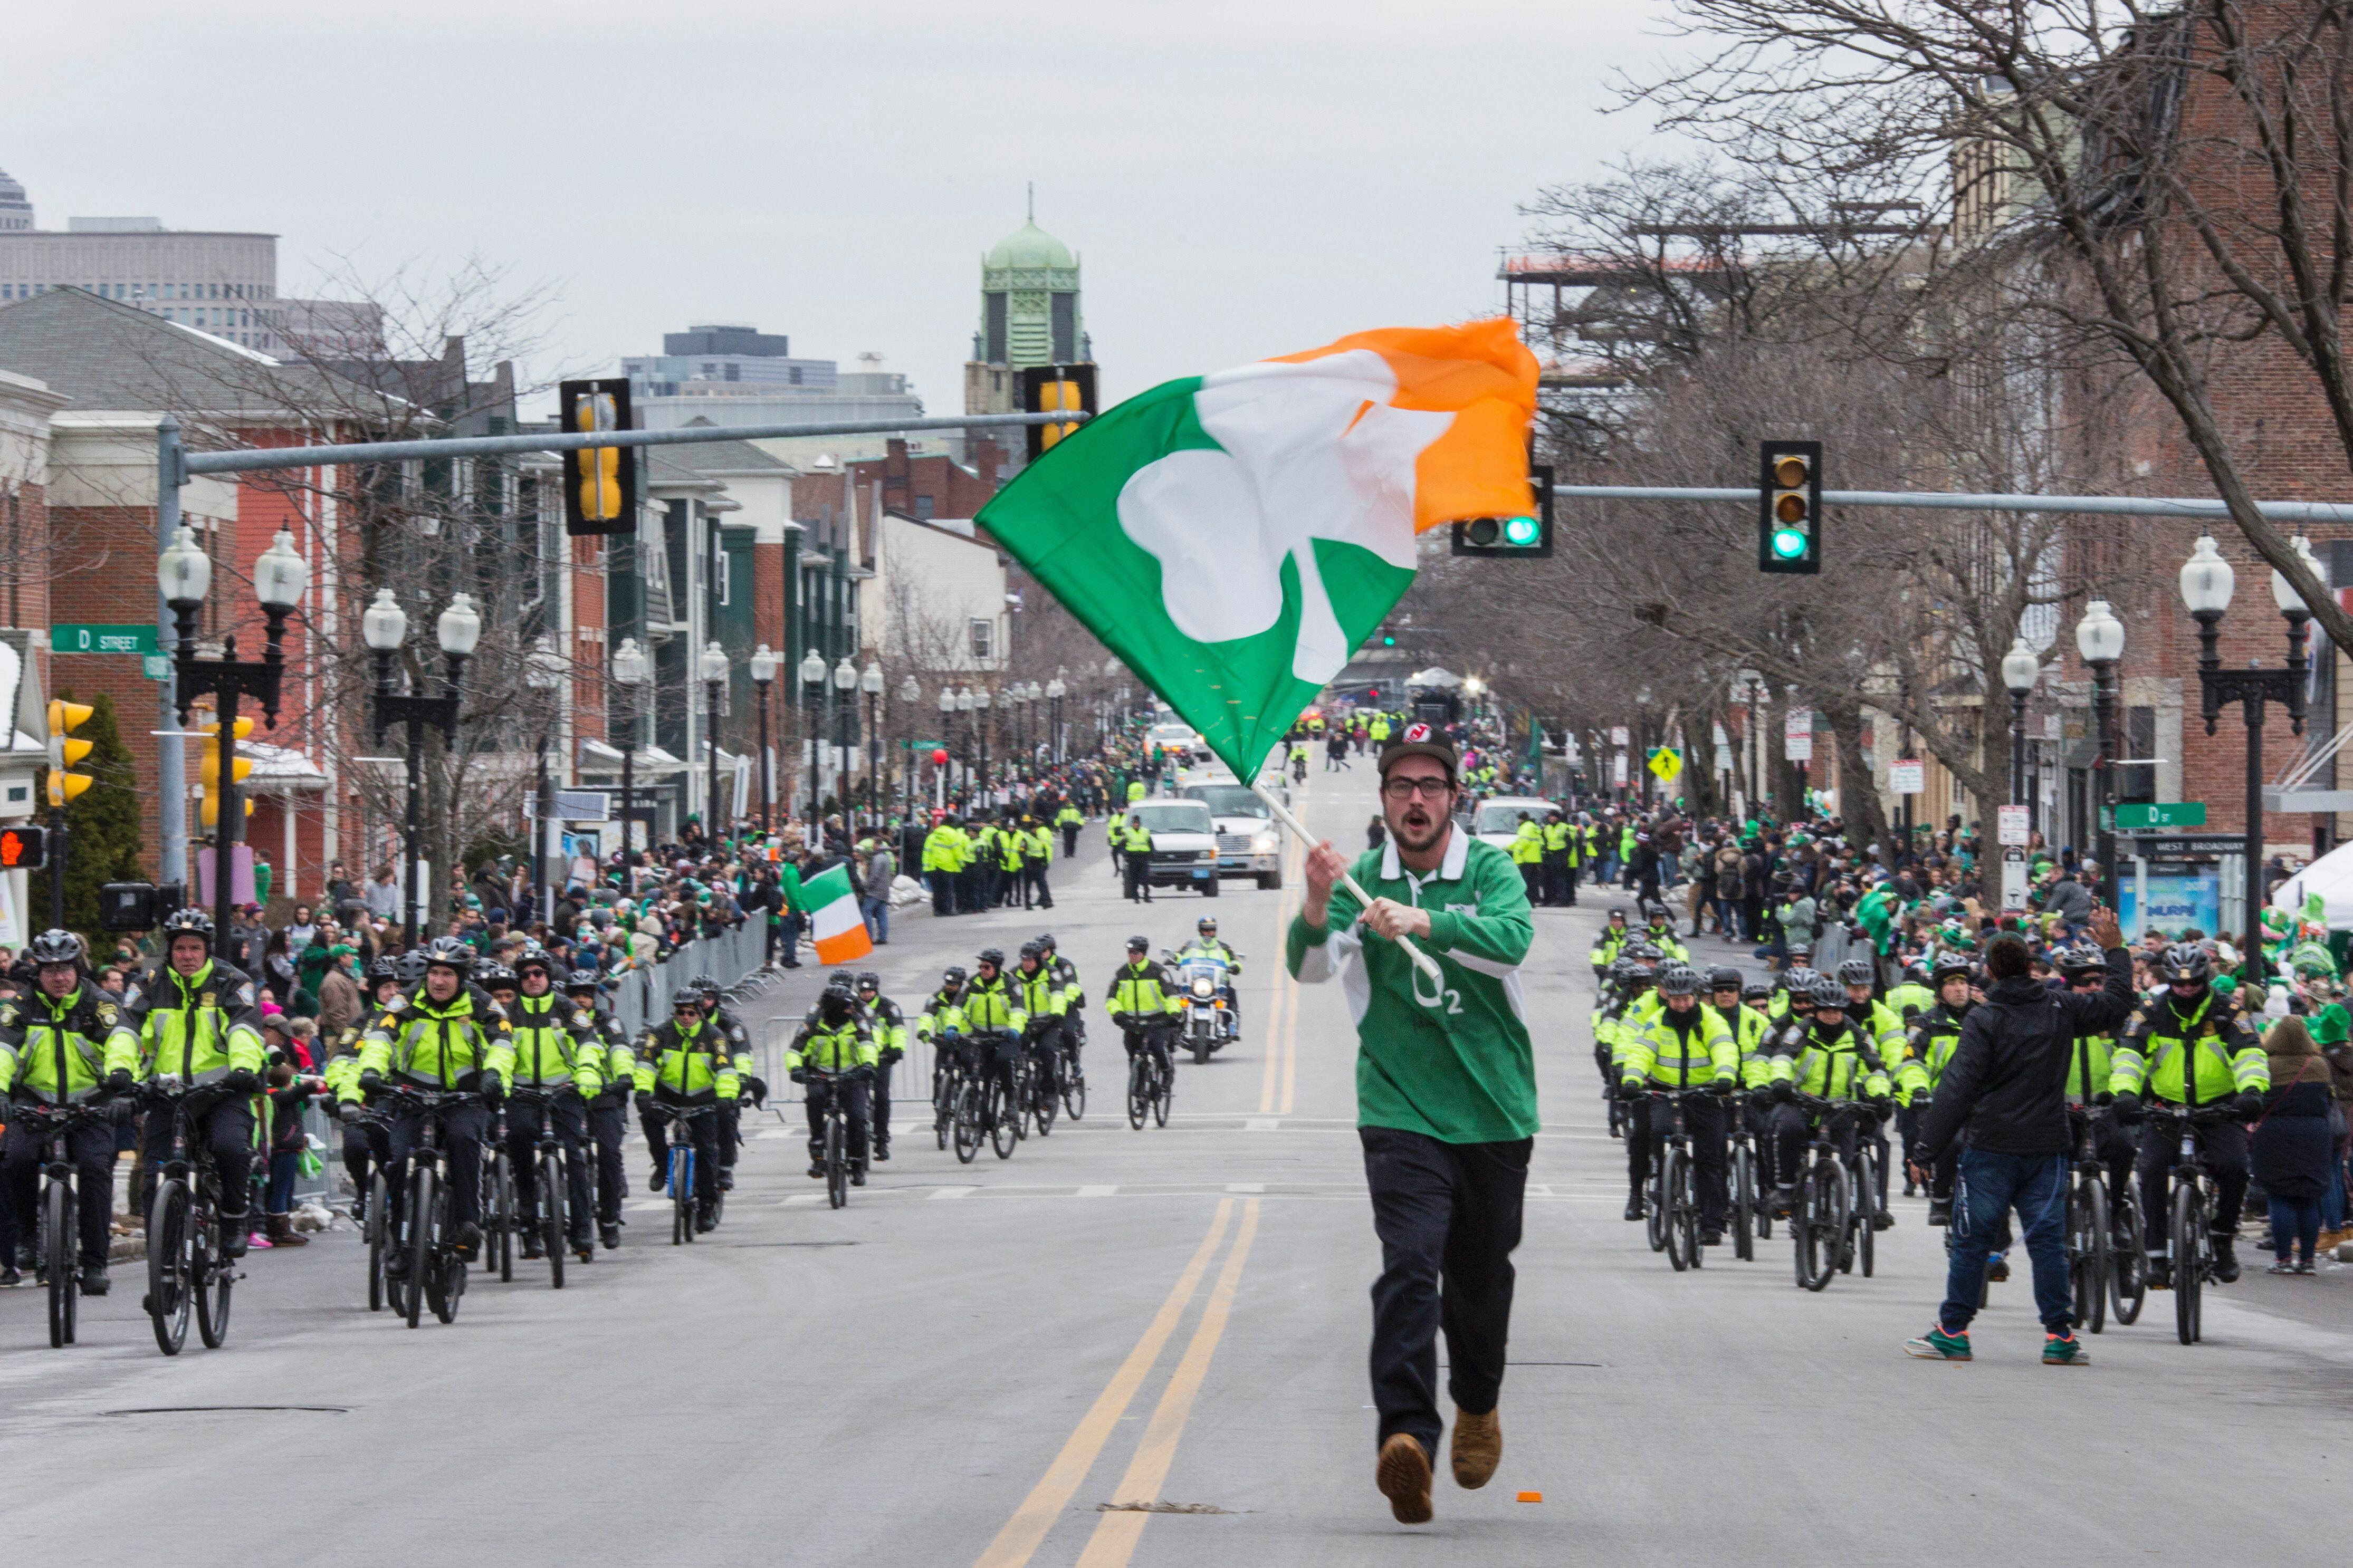 Boston Ranked Second Best City For St. Patrick's Day Celebrations